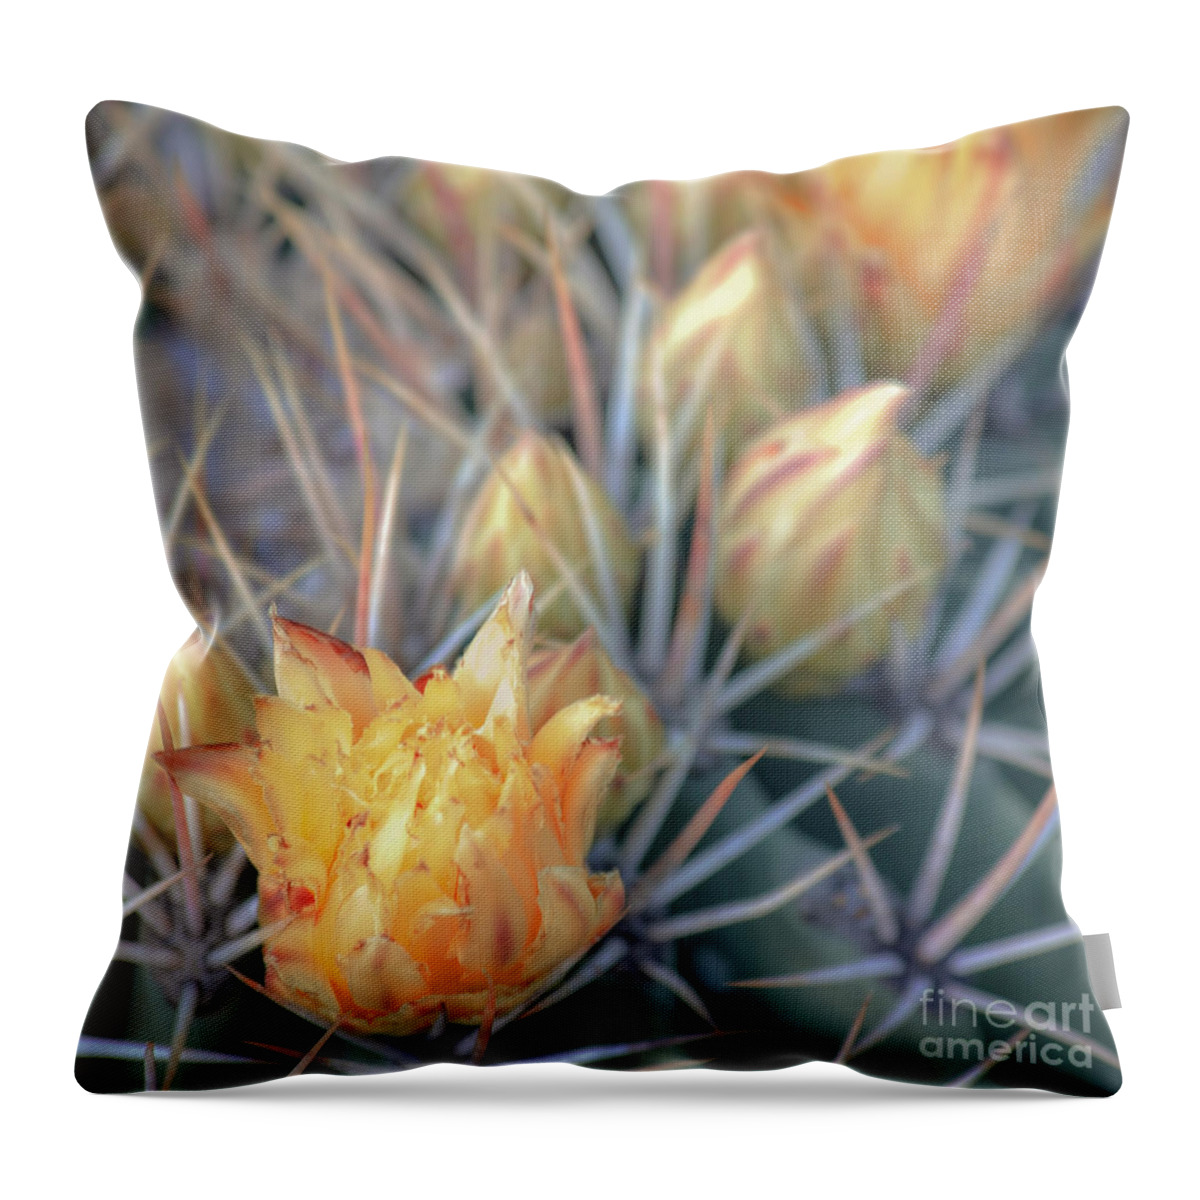 Cactus Flower Throw Pillow featuring the photograph Yellow Cactus Flower with Buds by Elisabeth Lucas